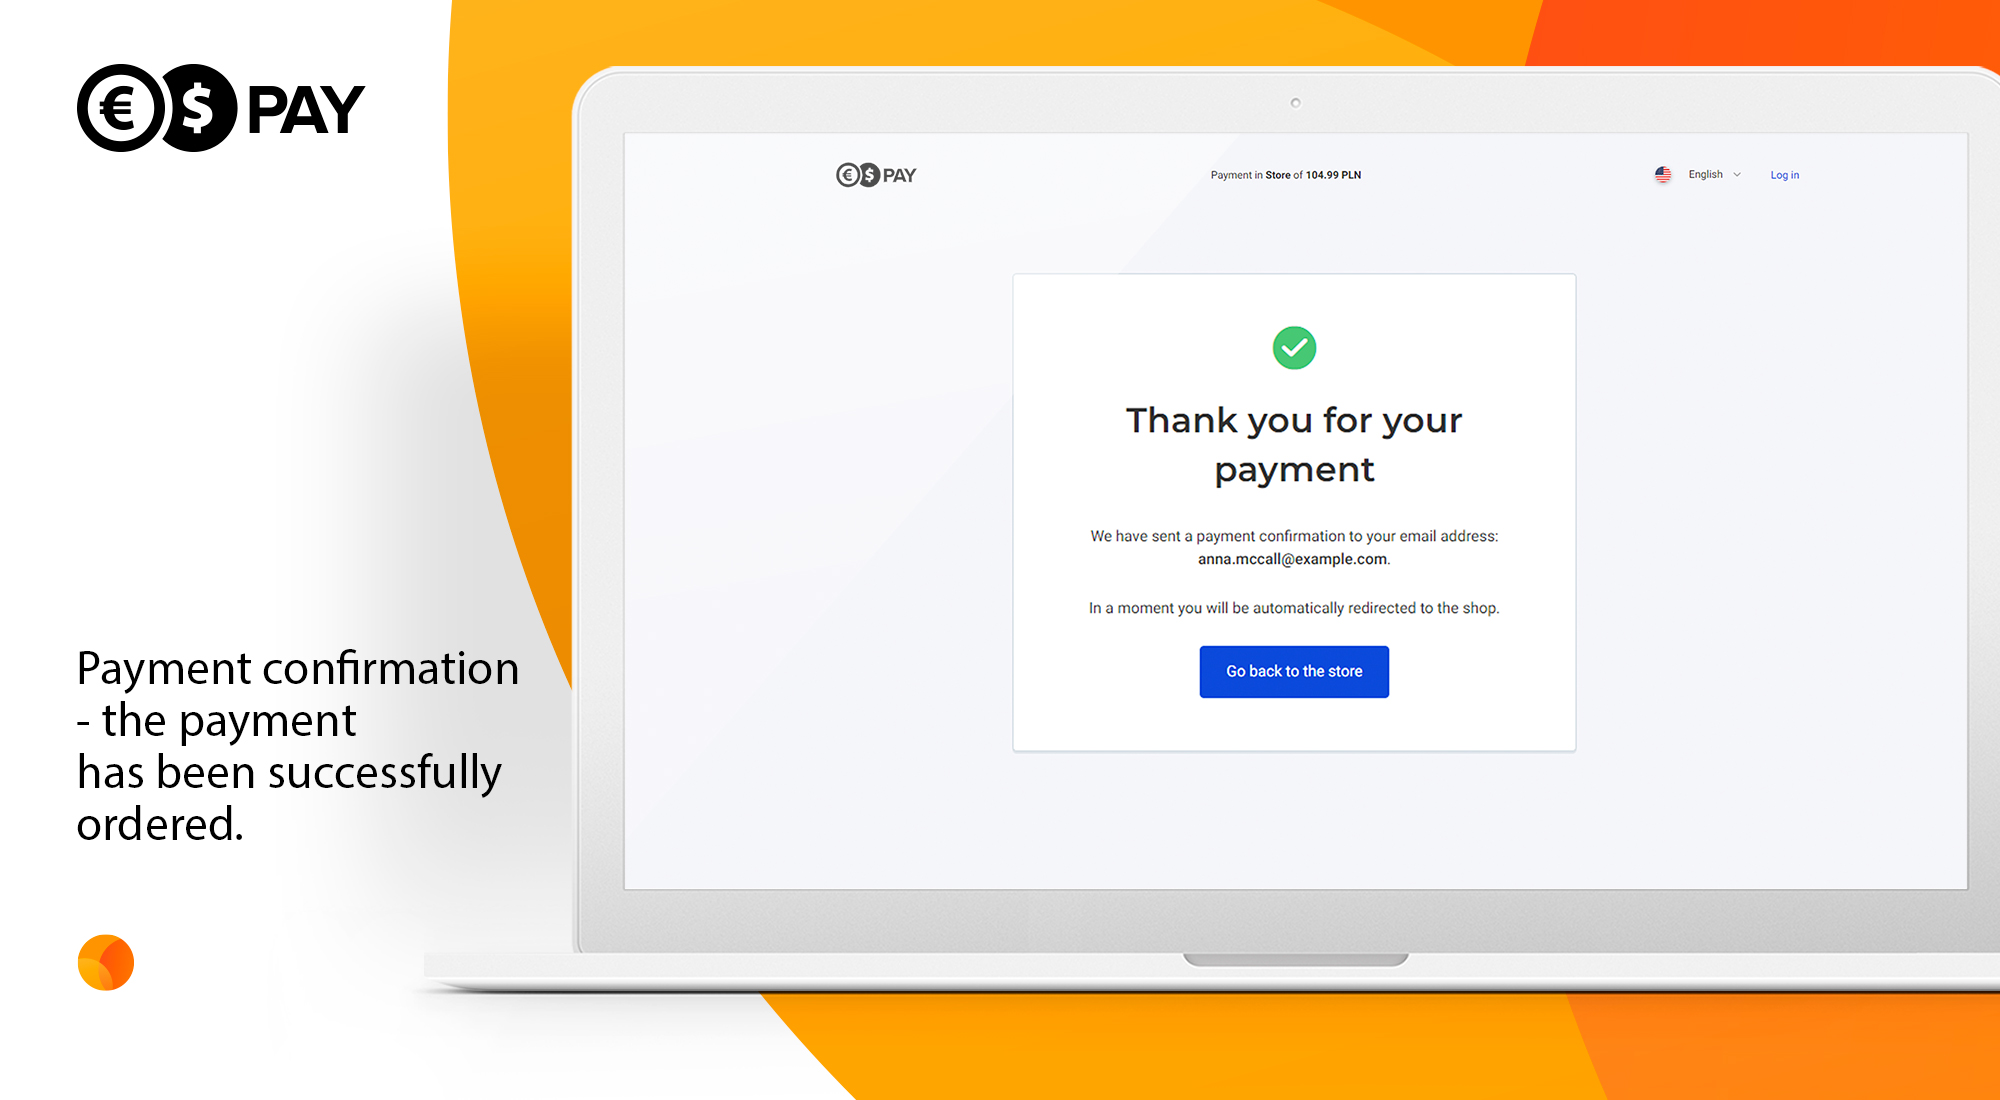 Payment confirmation - the payment has been successfully ordered.